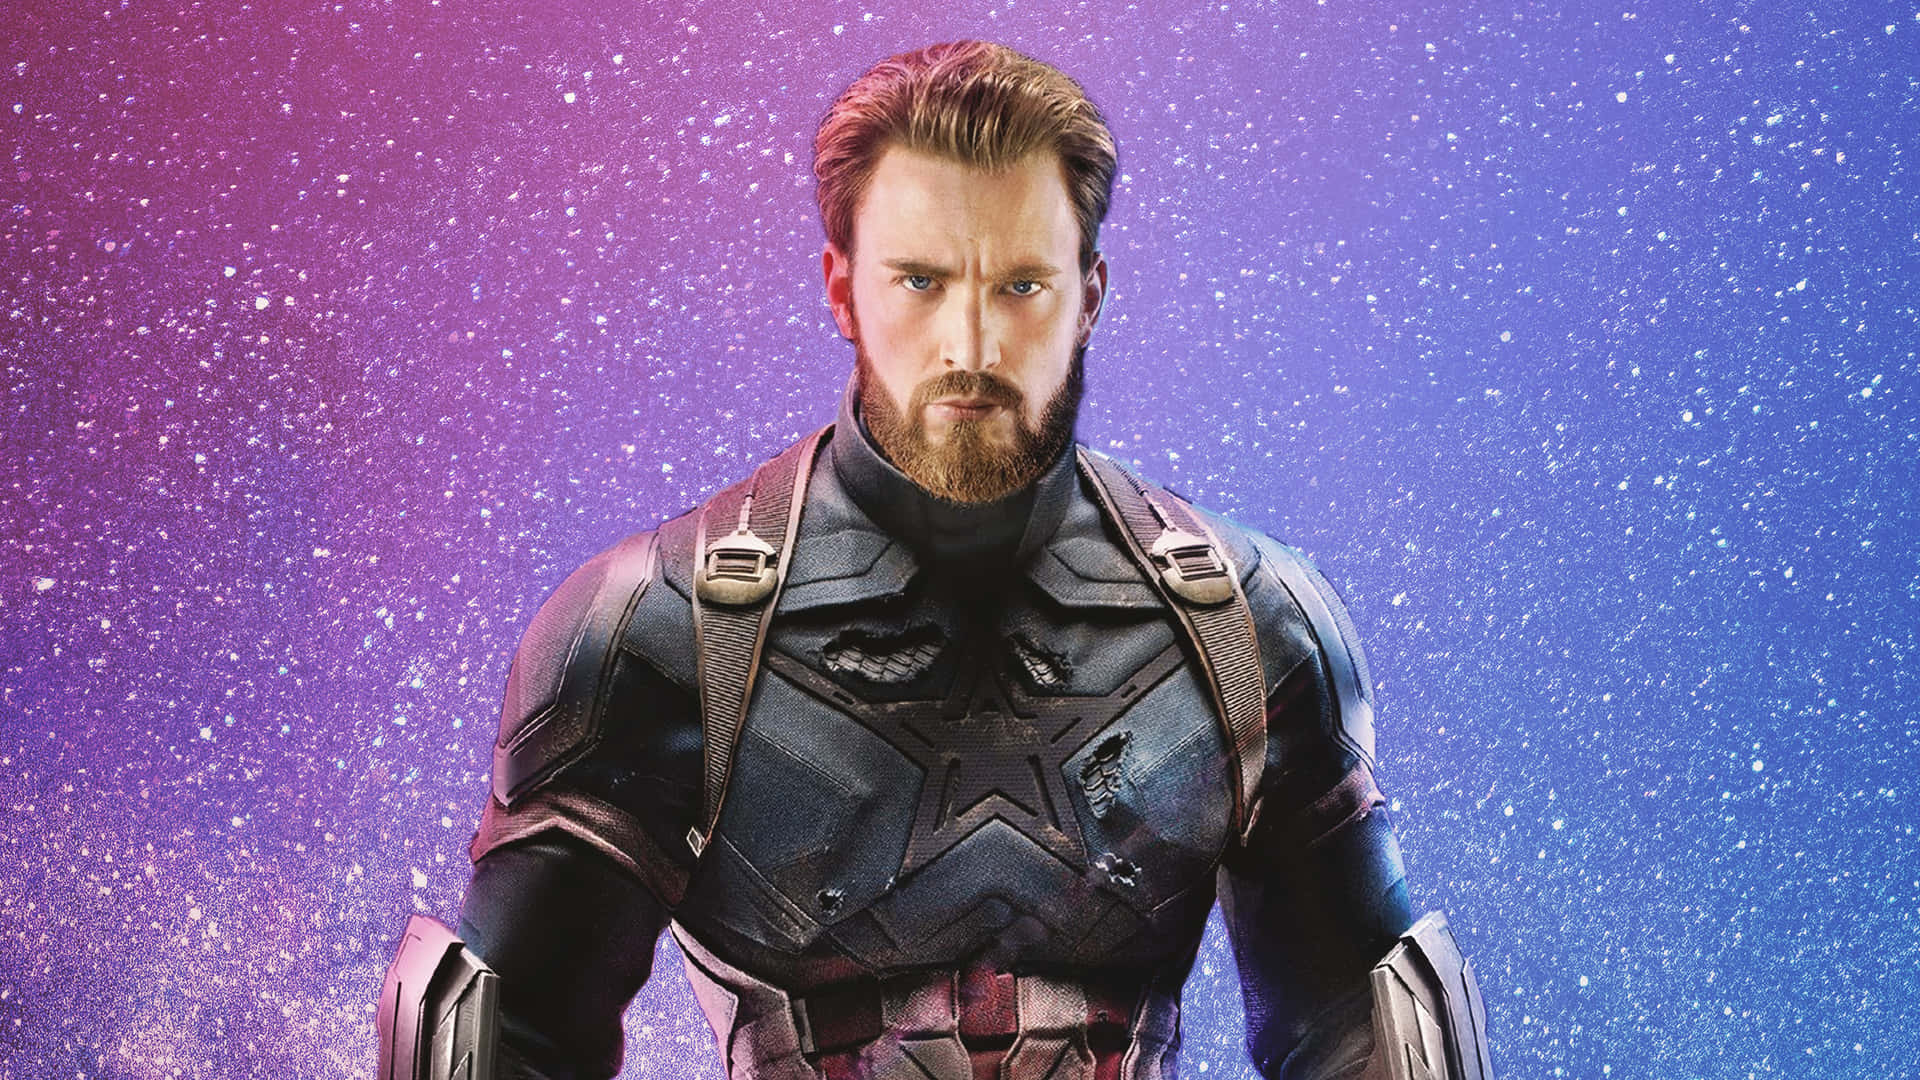 captain america in space with a starry background Wallpaper